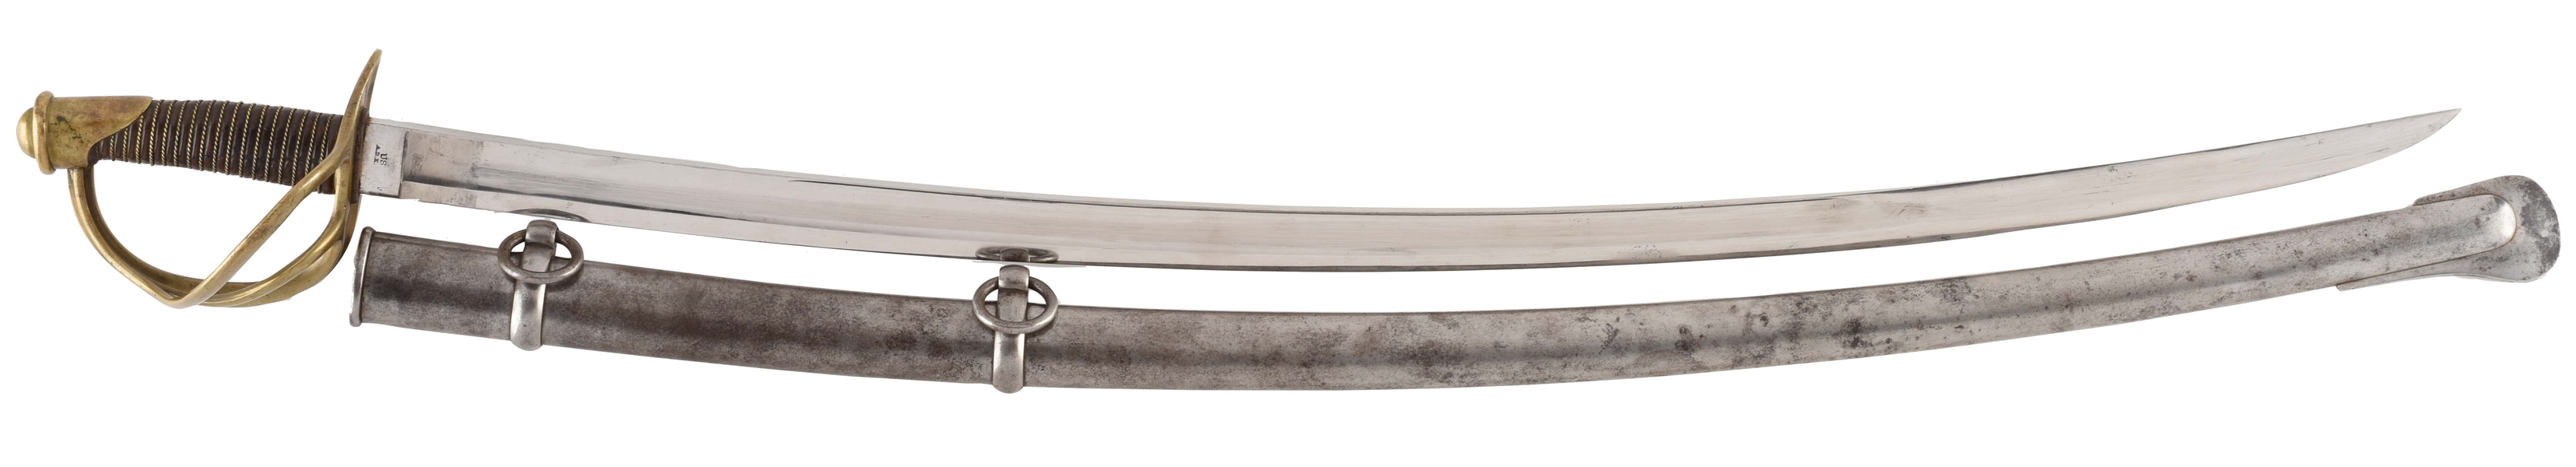 AMES MODEL 1840 CAVALRY SABER WITH SCABBARD.